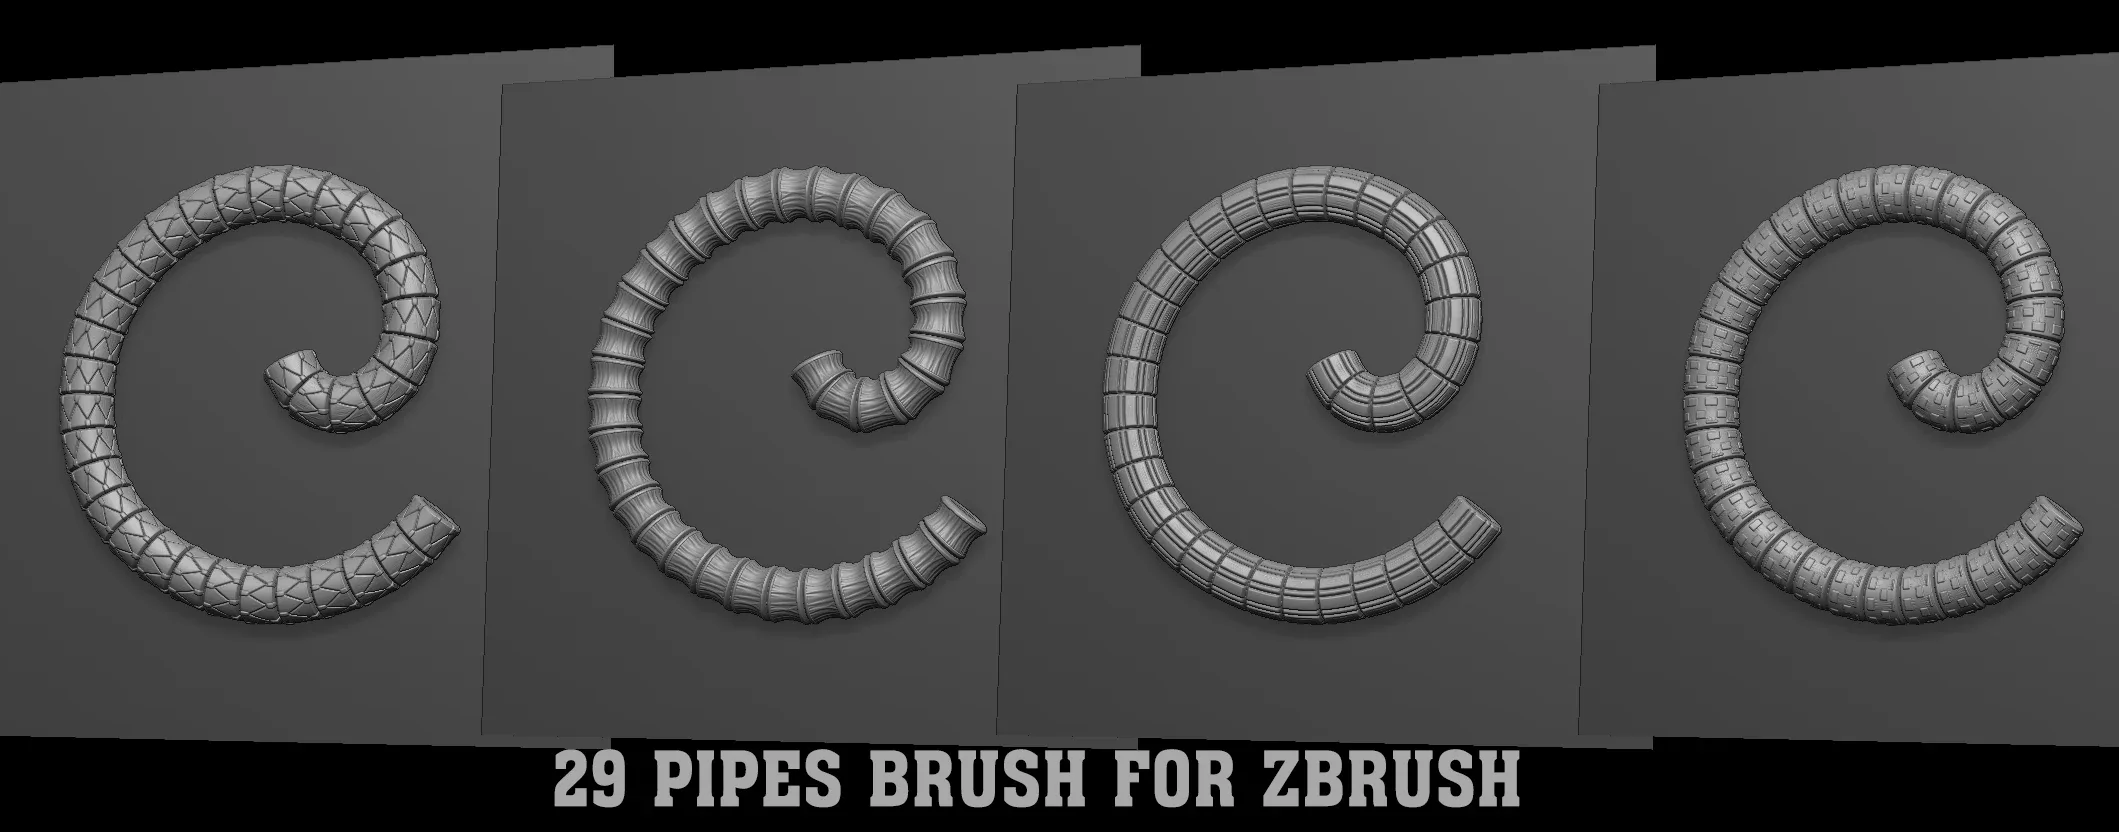 29 Pipes Brush for Zbrush